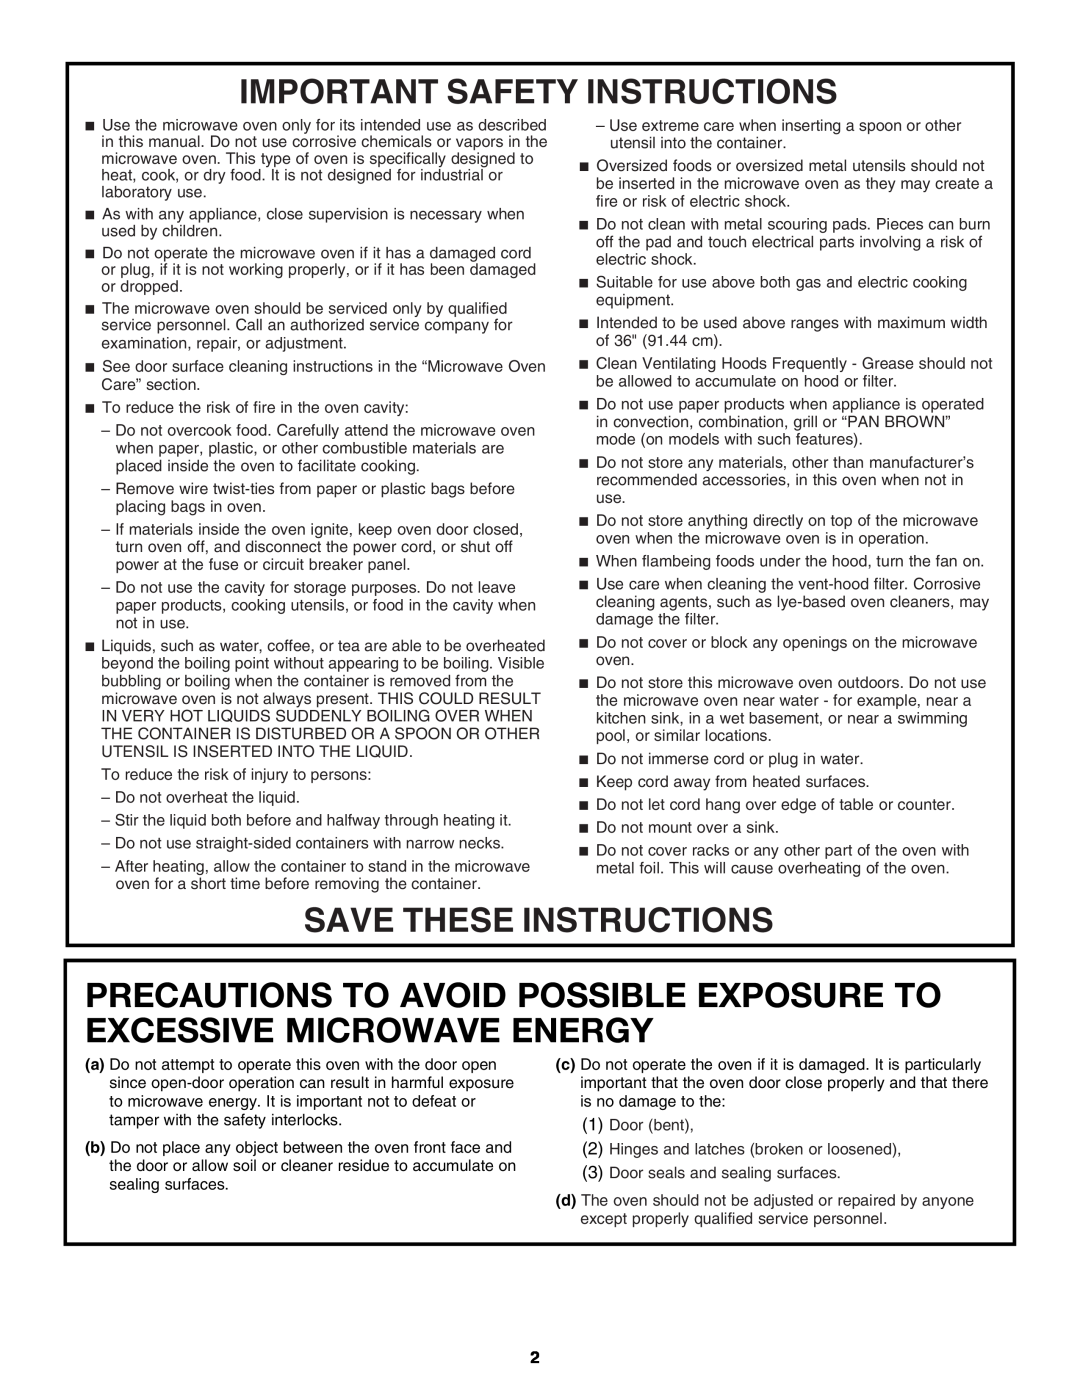 Jenn-Air W10318717A Precautions To Avoid Possible Exposure To Excessive Microwave Energy, Important Safety Instructions 